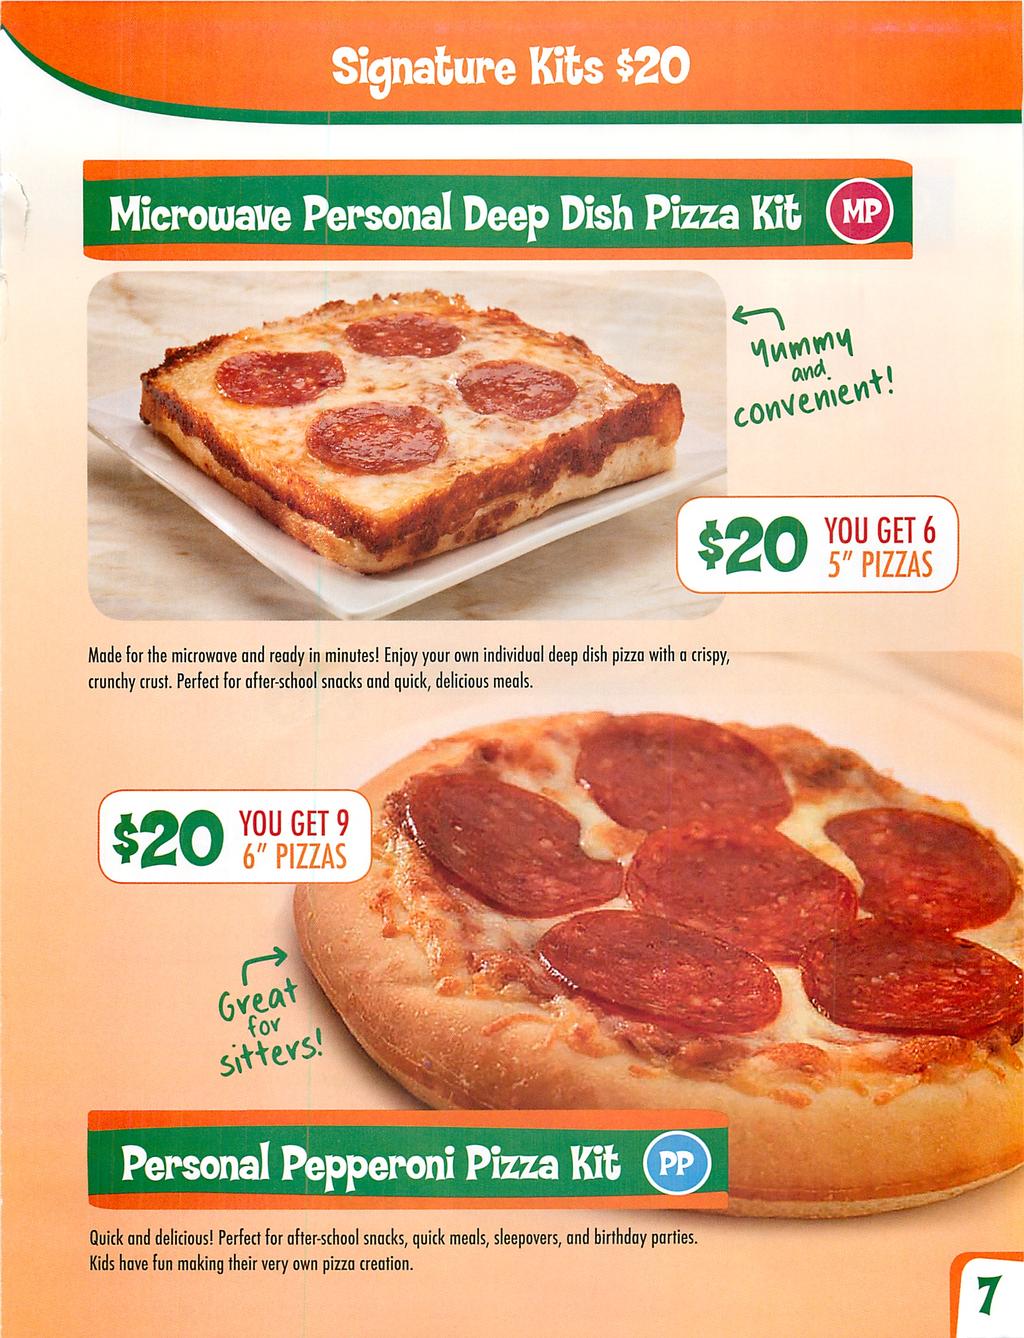 Signature Kits $ Microwave Personal Deep Dish Pizza Kit A^A YOU GET 6 y^v 5" PIZZAS Made for the microwave and ready in minutes! Enjoy your own individual deep dish pizza with acrispy, crunchy crust.